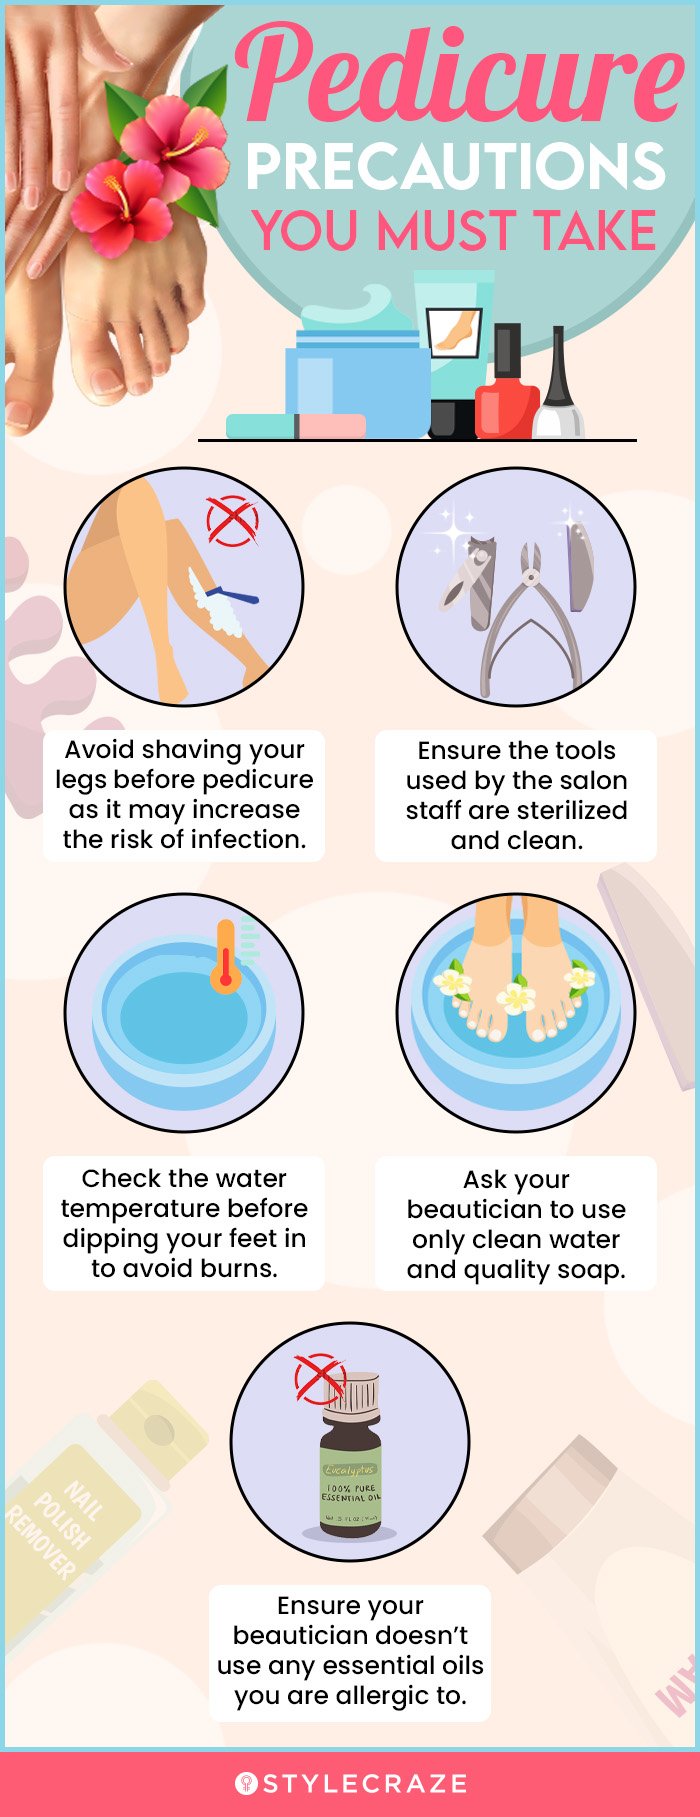 pedicure precautions you must take [infographic]